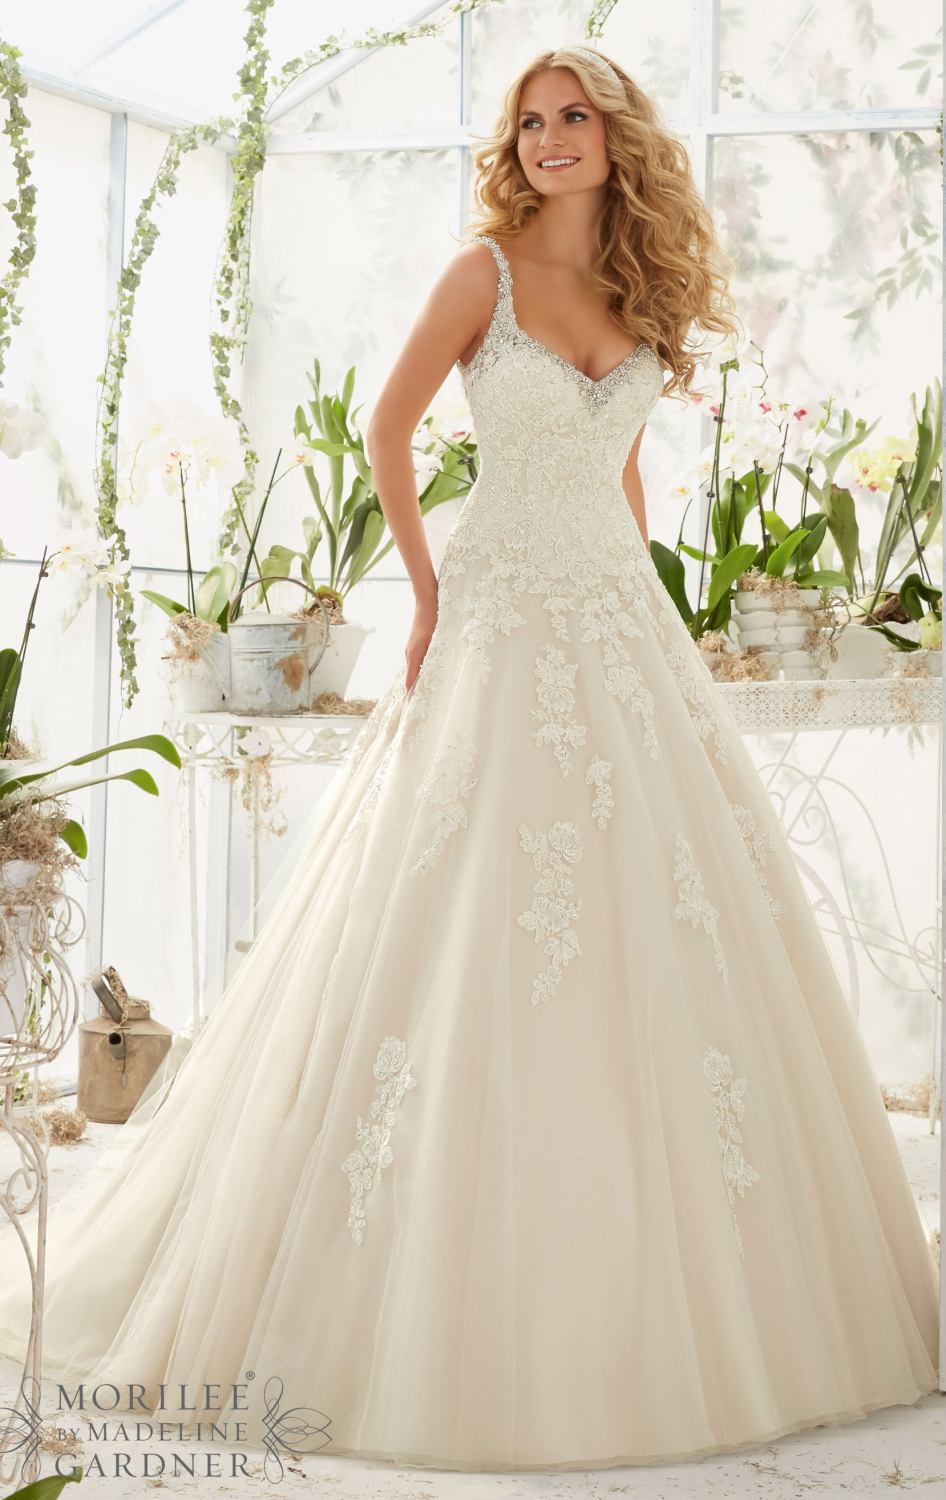 17 Winter Wedding Gowns You’ll Love